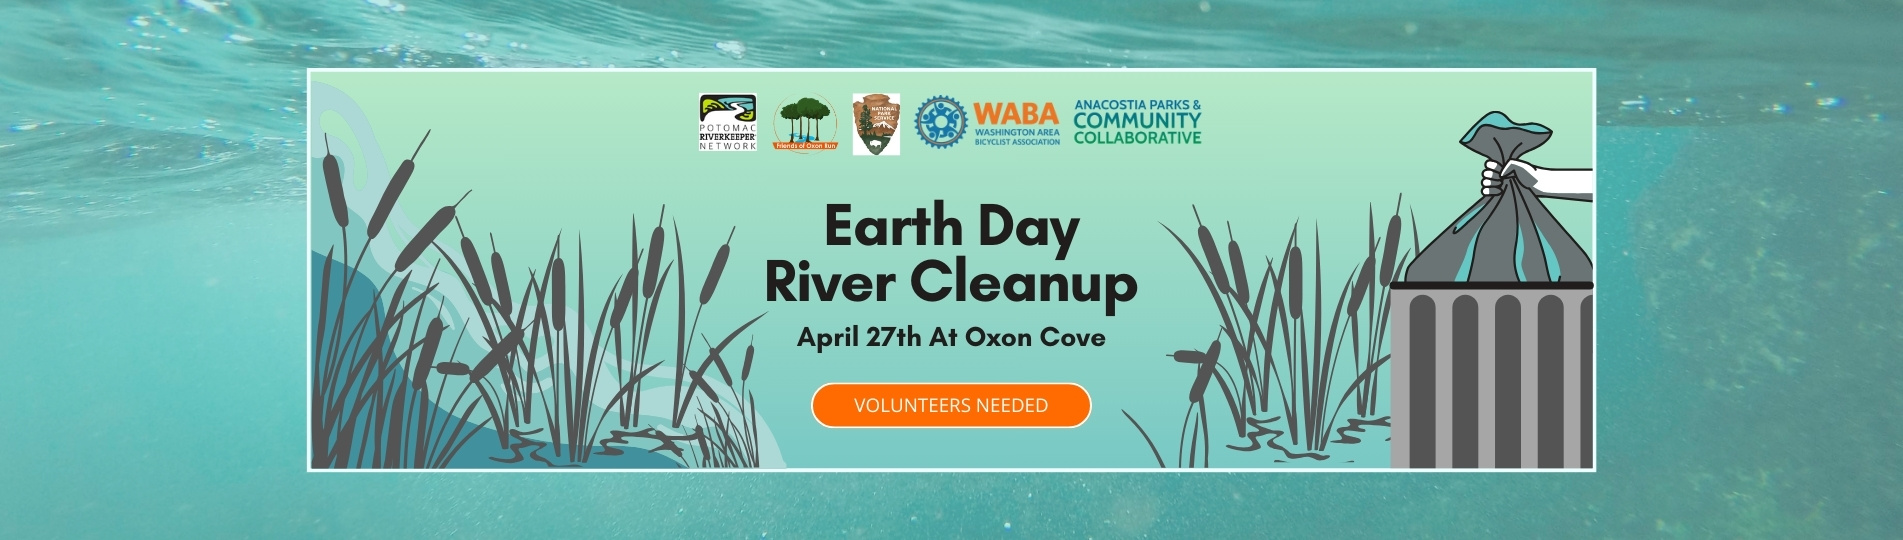 Earth Day River Cleanup - Oxon Hill